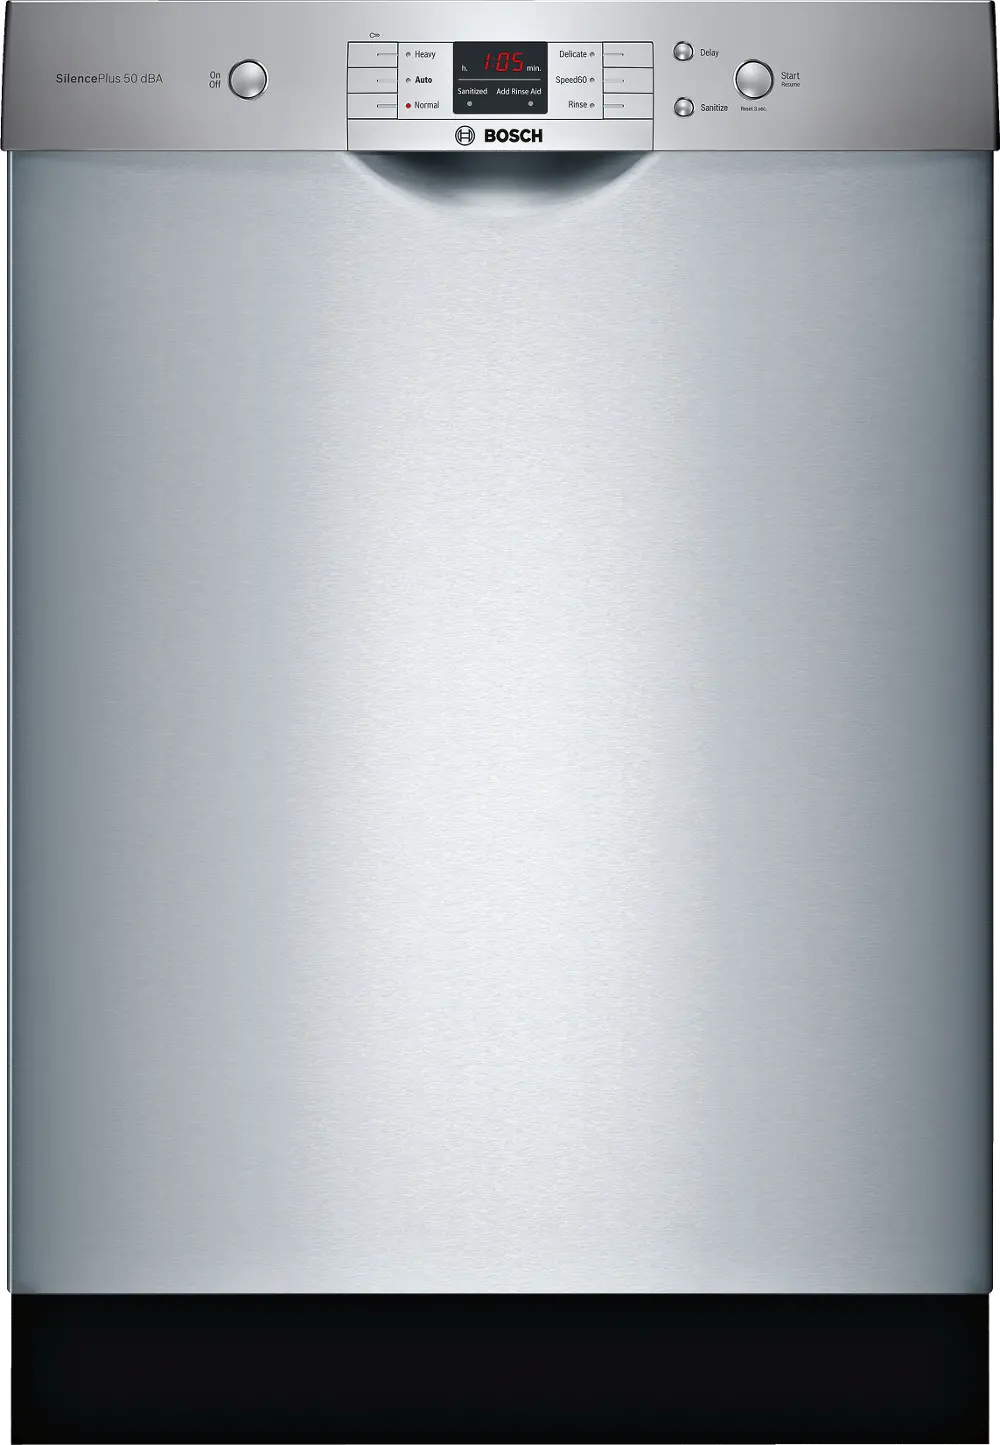 SHEM3AY55N Bosch 100 Series Front Control Dishwasher - Stainless Steel-1